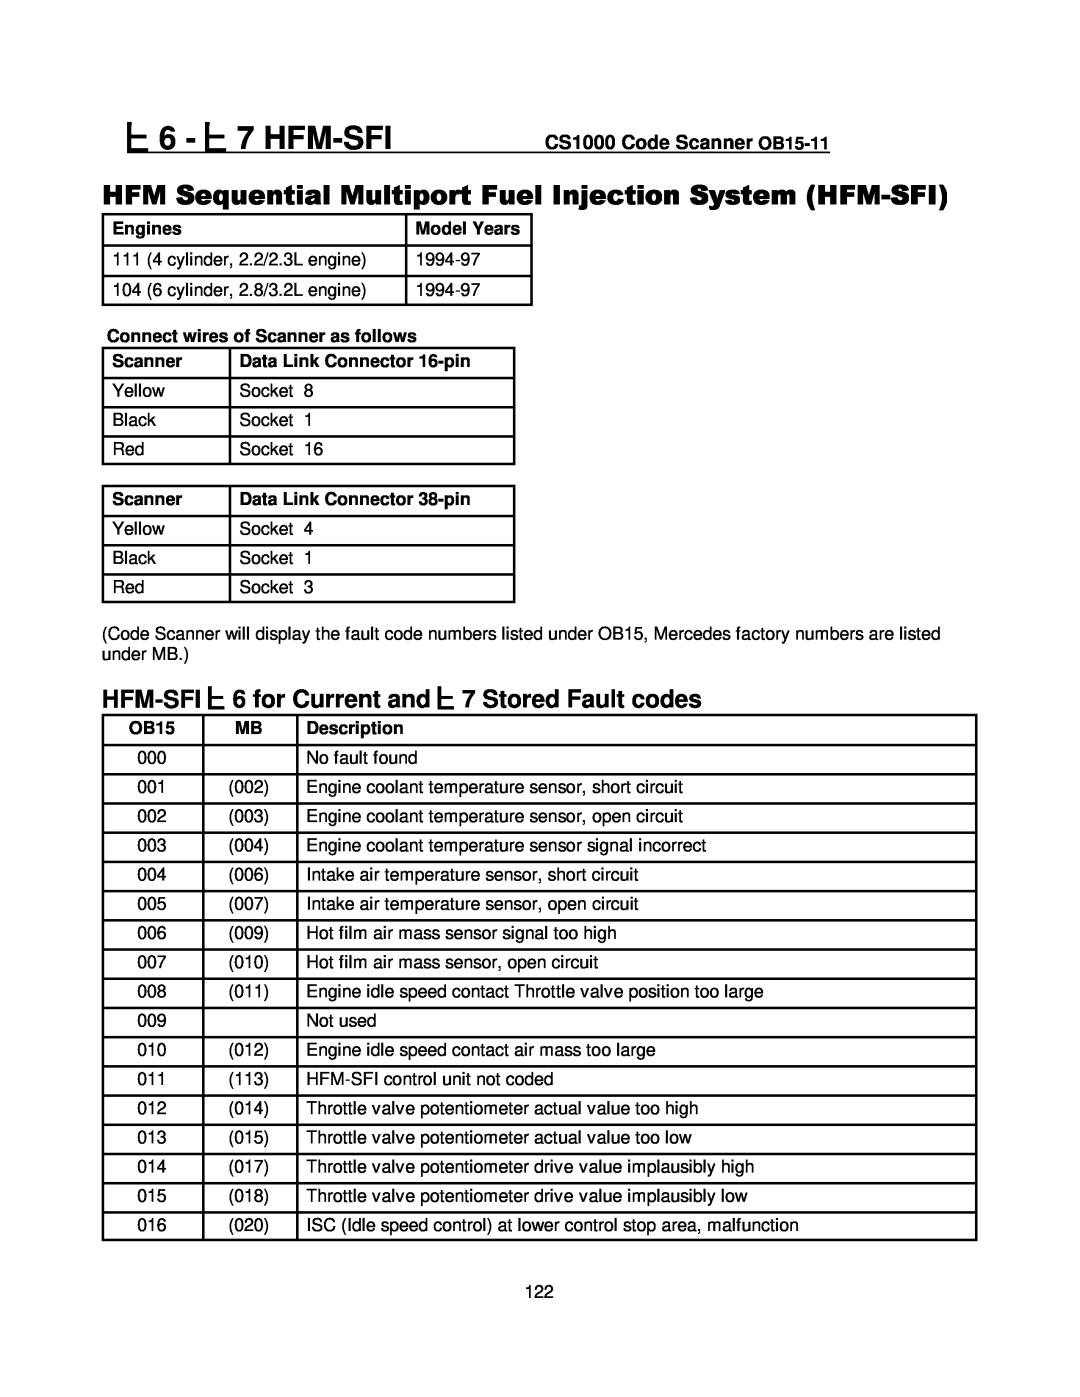 Mercedes-Benz for Current and, Stored Fault codes, Hfm-Sfi, #6 - $#%&#7 HFM-SFICS1000 Code Scanner OB15-11, Engines 